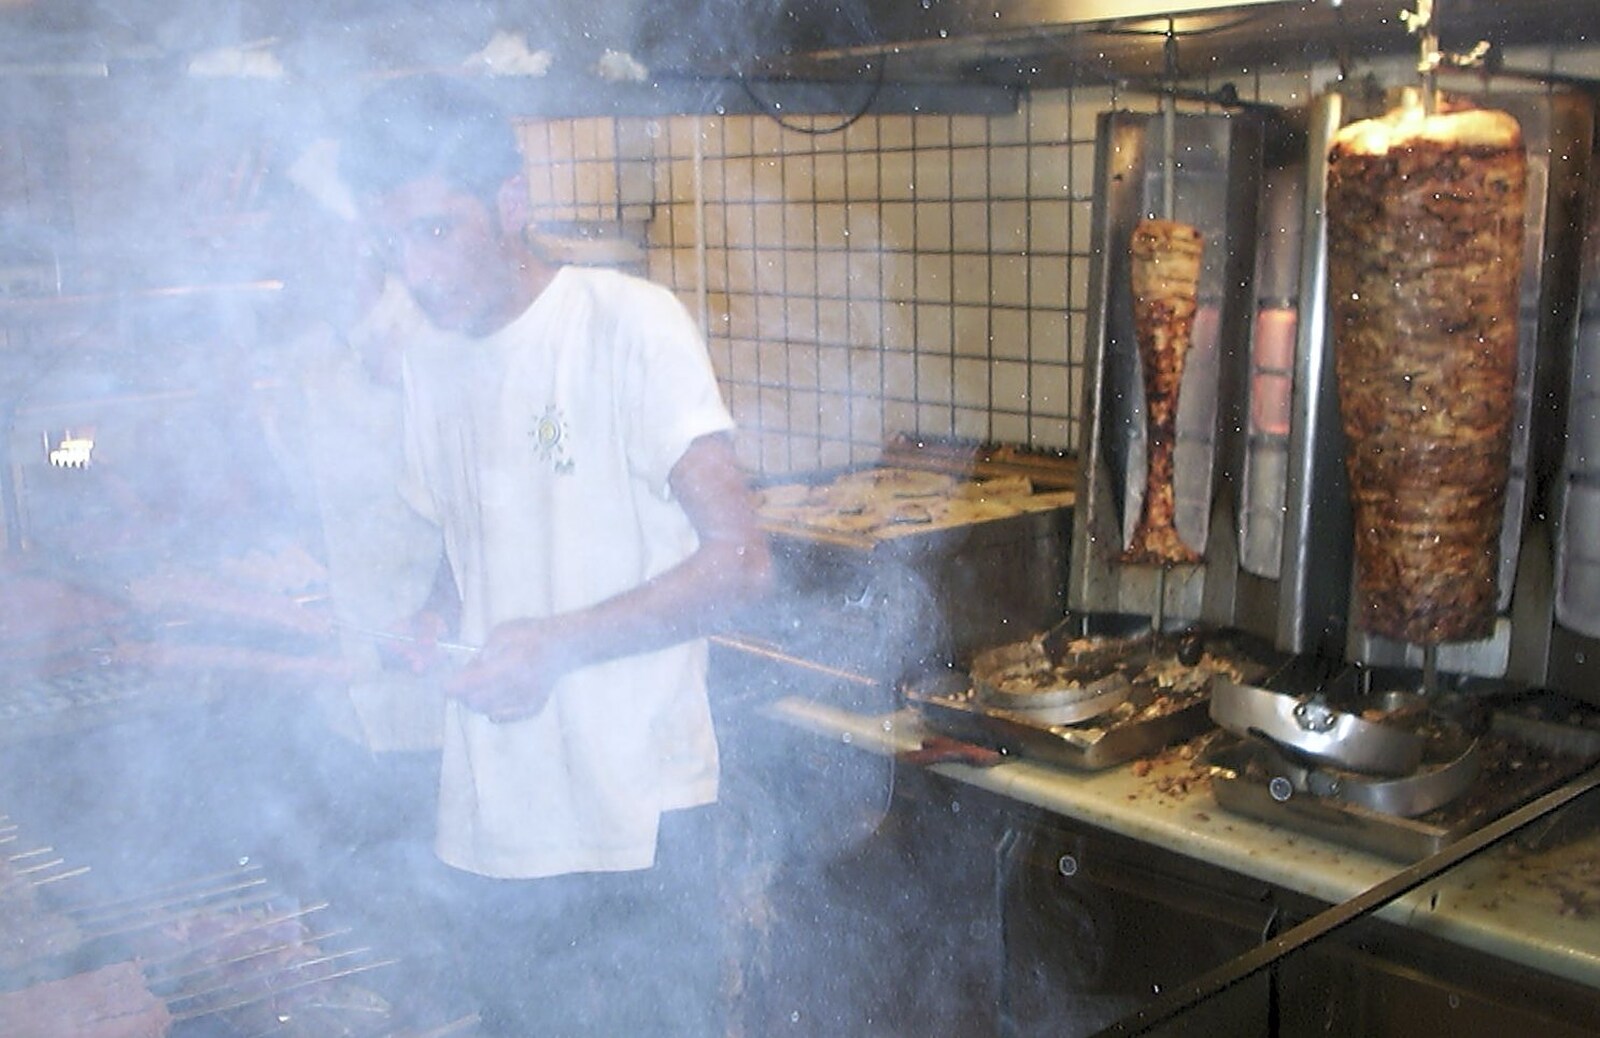 The smoke is intense in the kebab shop from A Postcard From Athens: A Day Trip to the Olympics, Greece - 19th August 2004